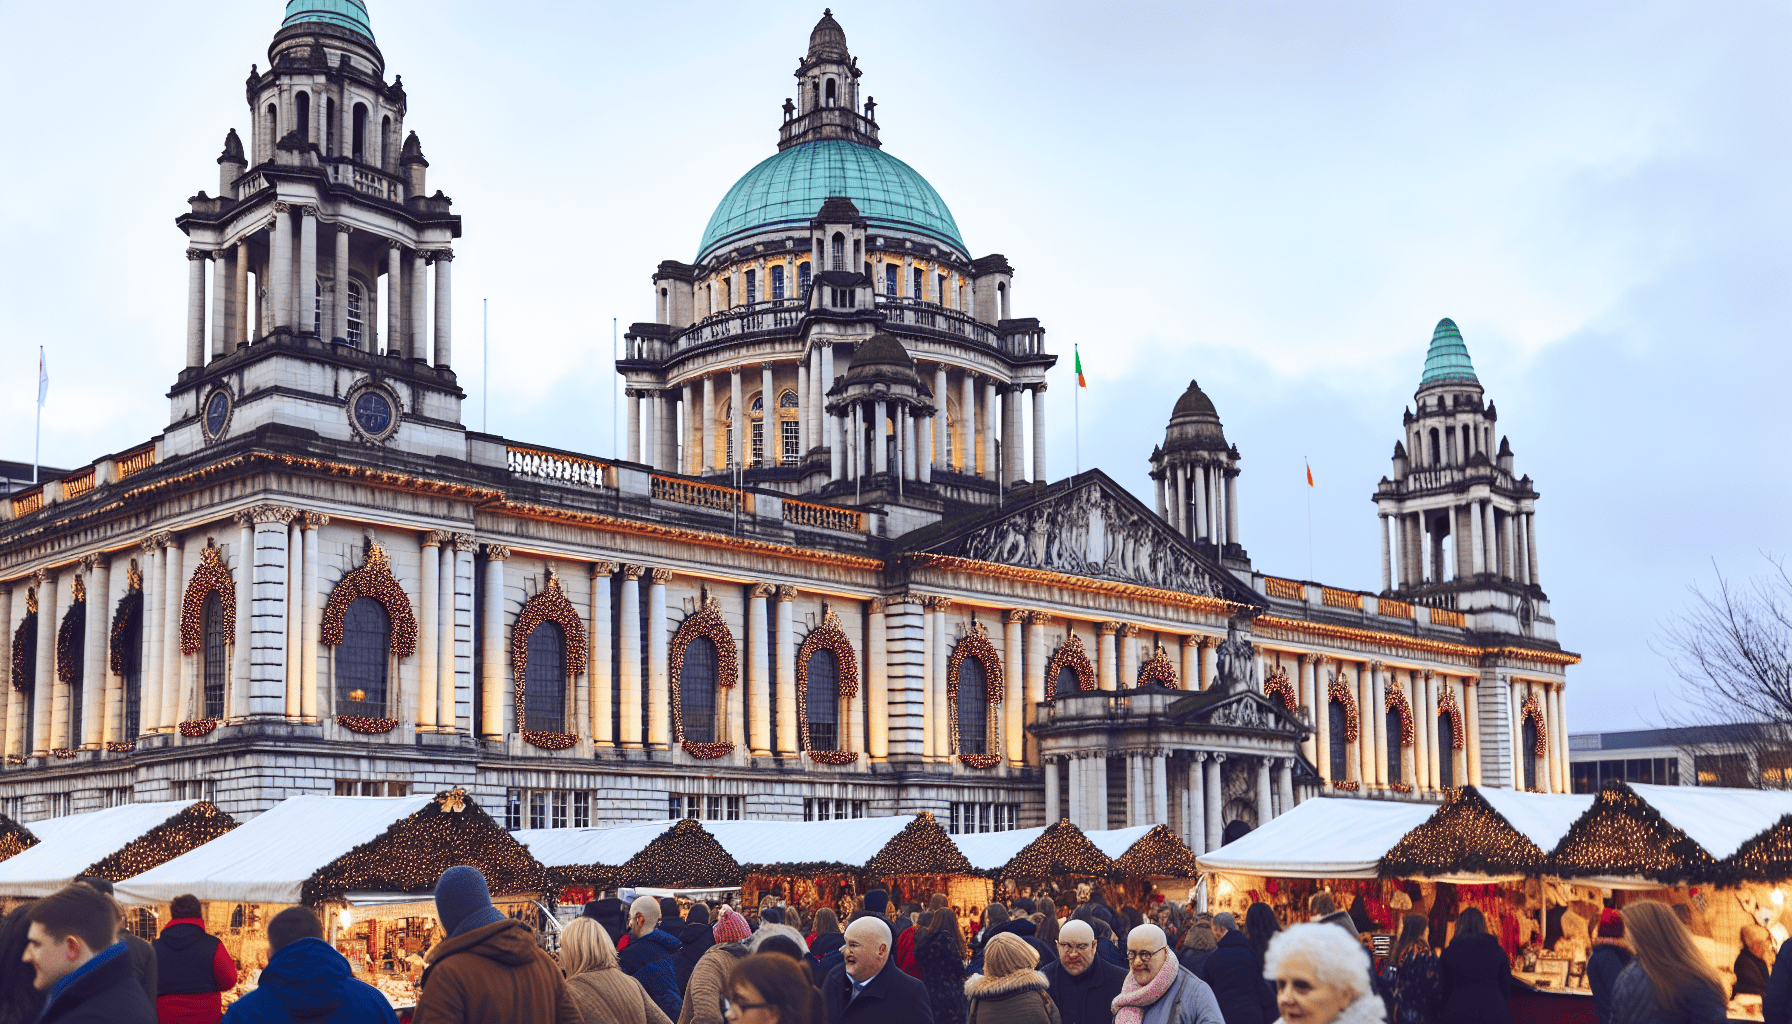 Belfast City Hall with festive decorations and market stalls